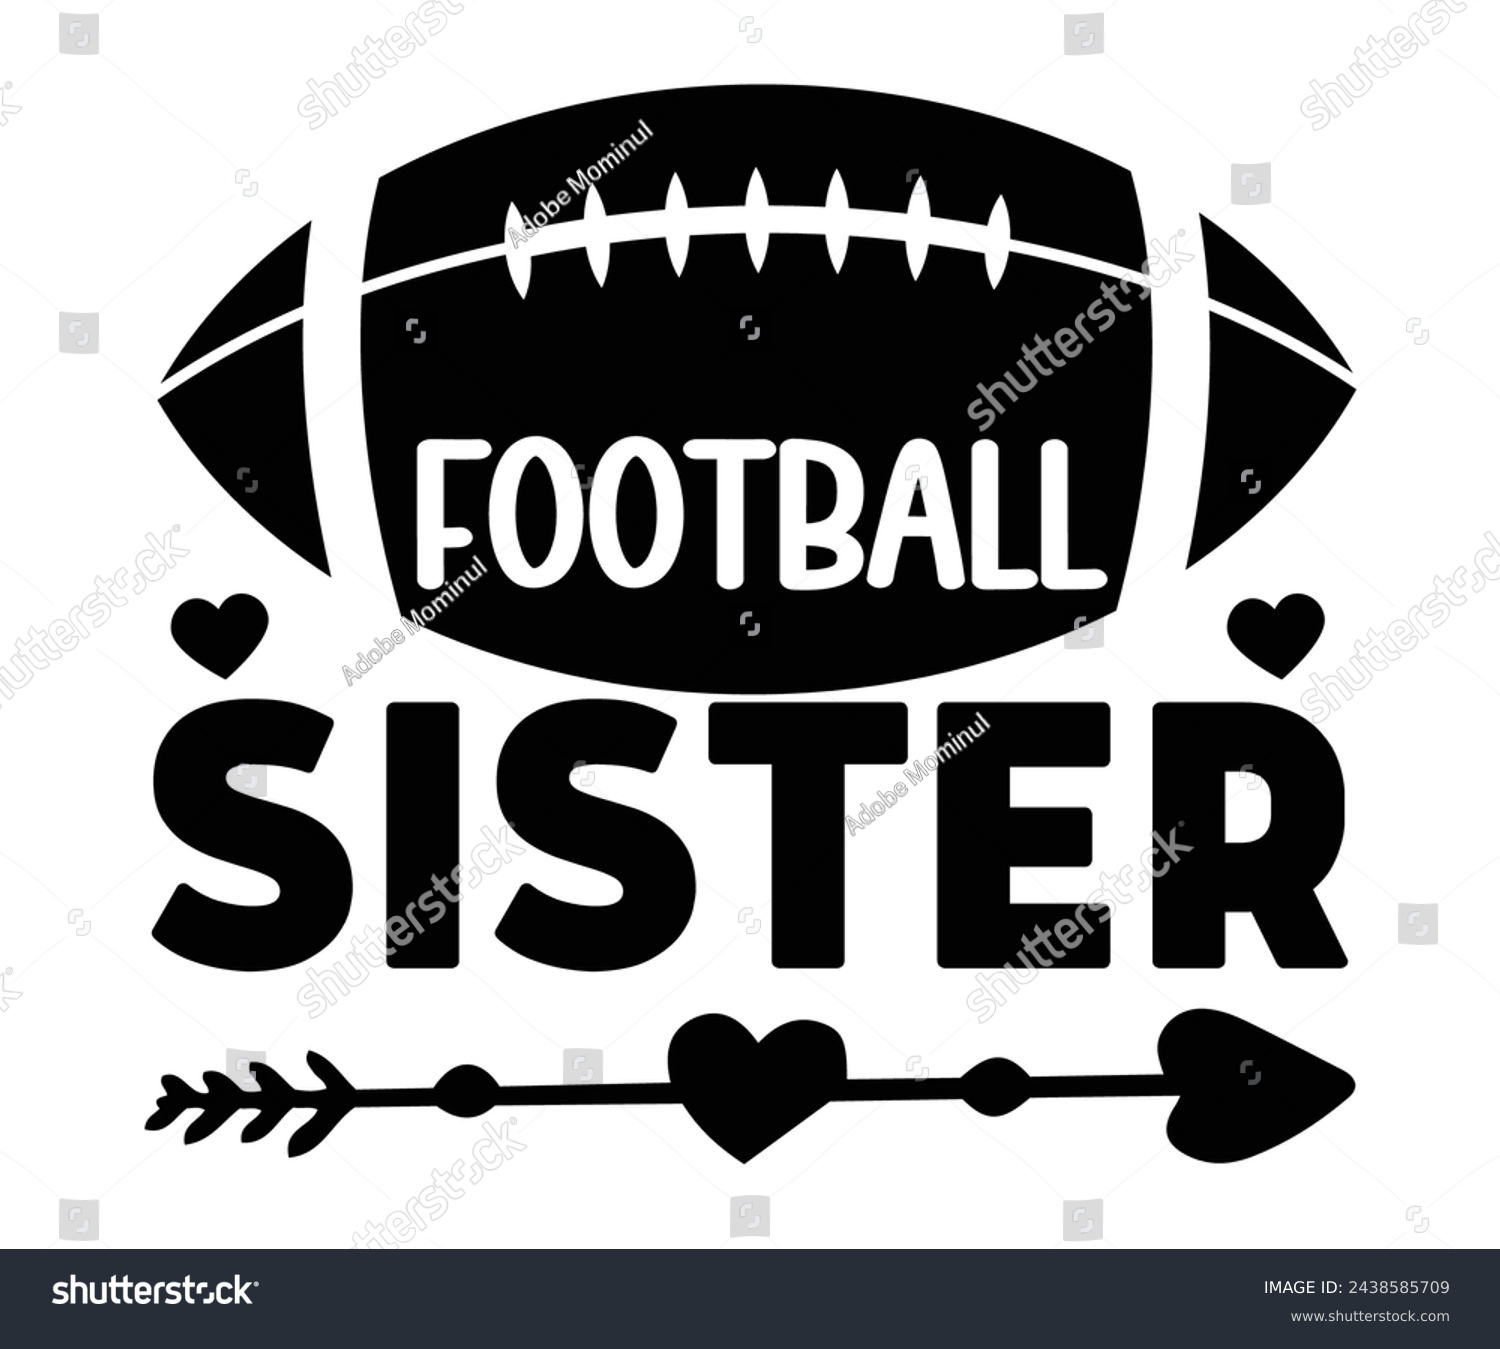 SVG of Football Sister Svg,Football Svg,Football Player Svg,Game Day Shirt,Football Quotes Svg,American Football Svg,Soccer Svg,Cut File,Commercial use svg